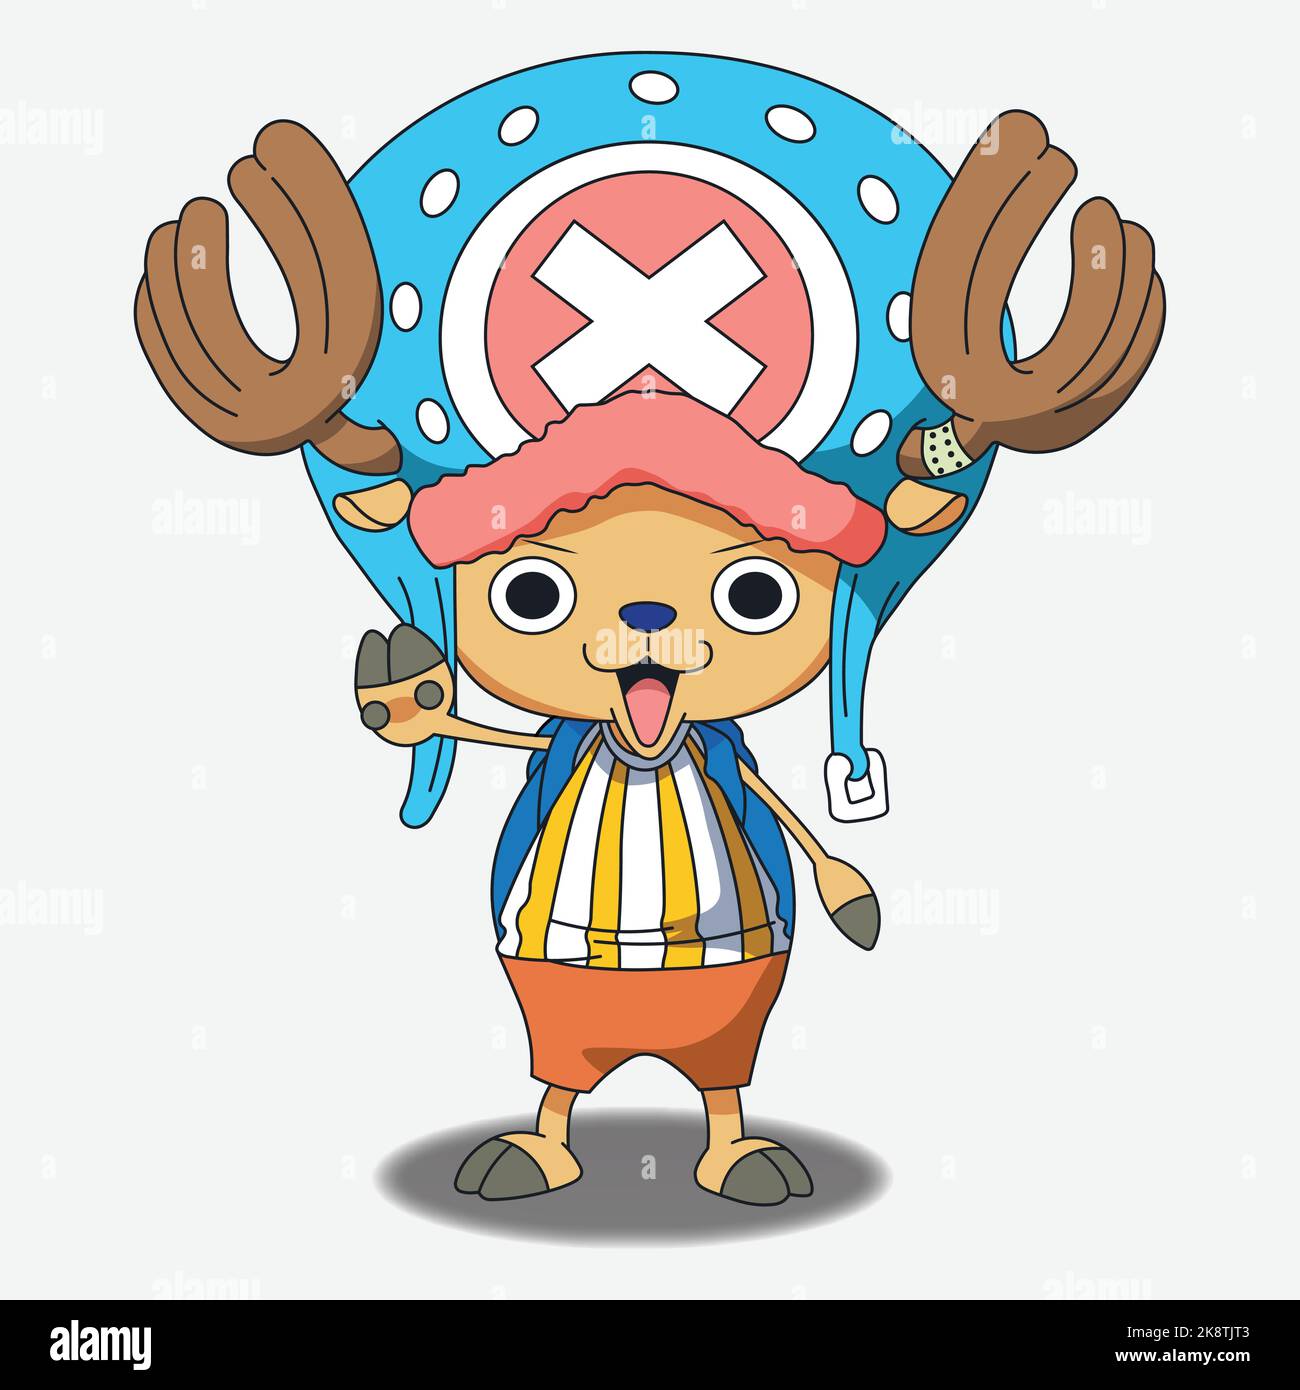 Download Onepiece Chopper Toni Royalty-Free Stock Illustration